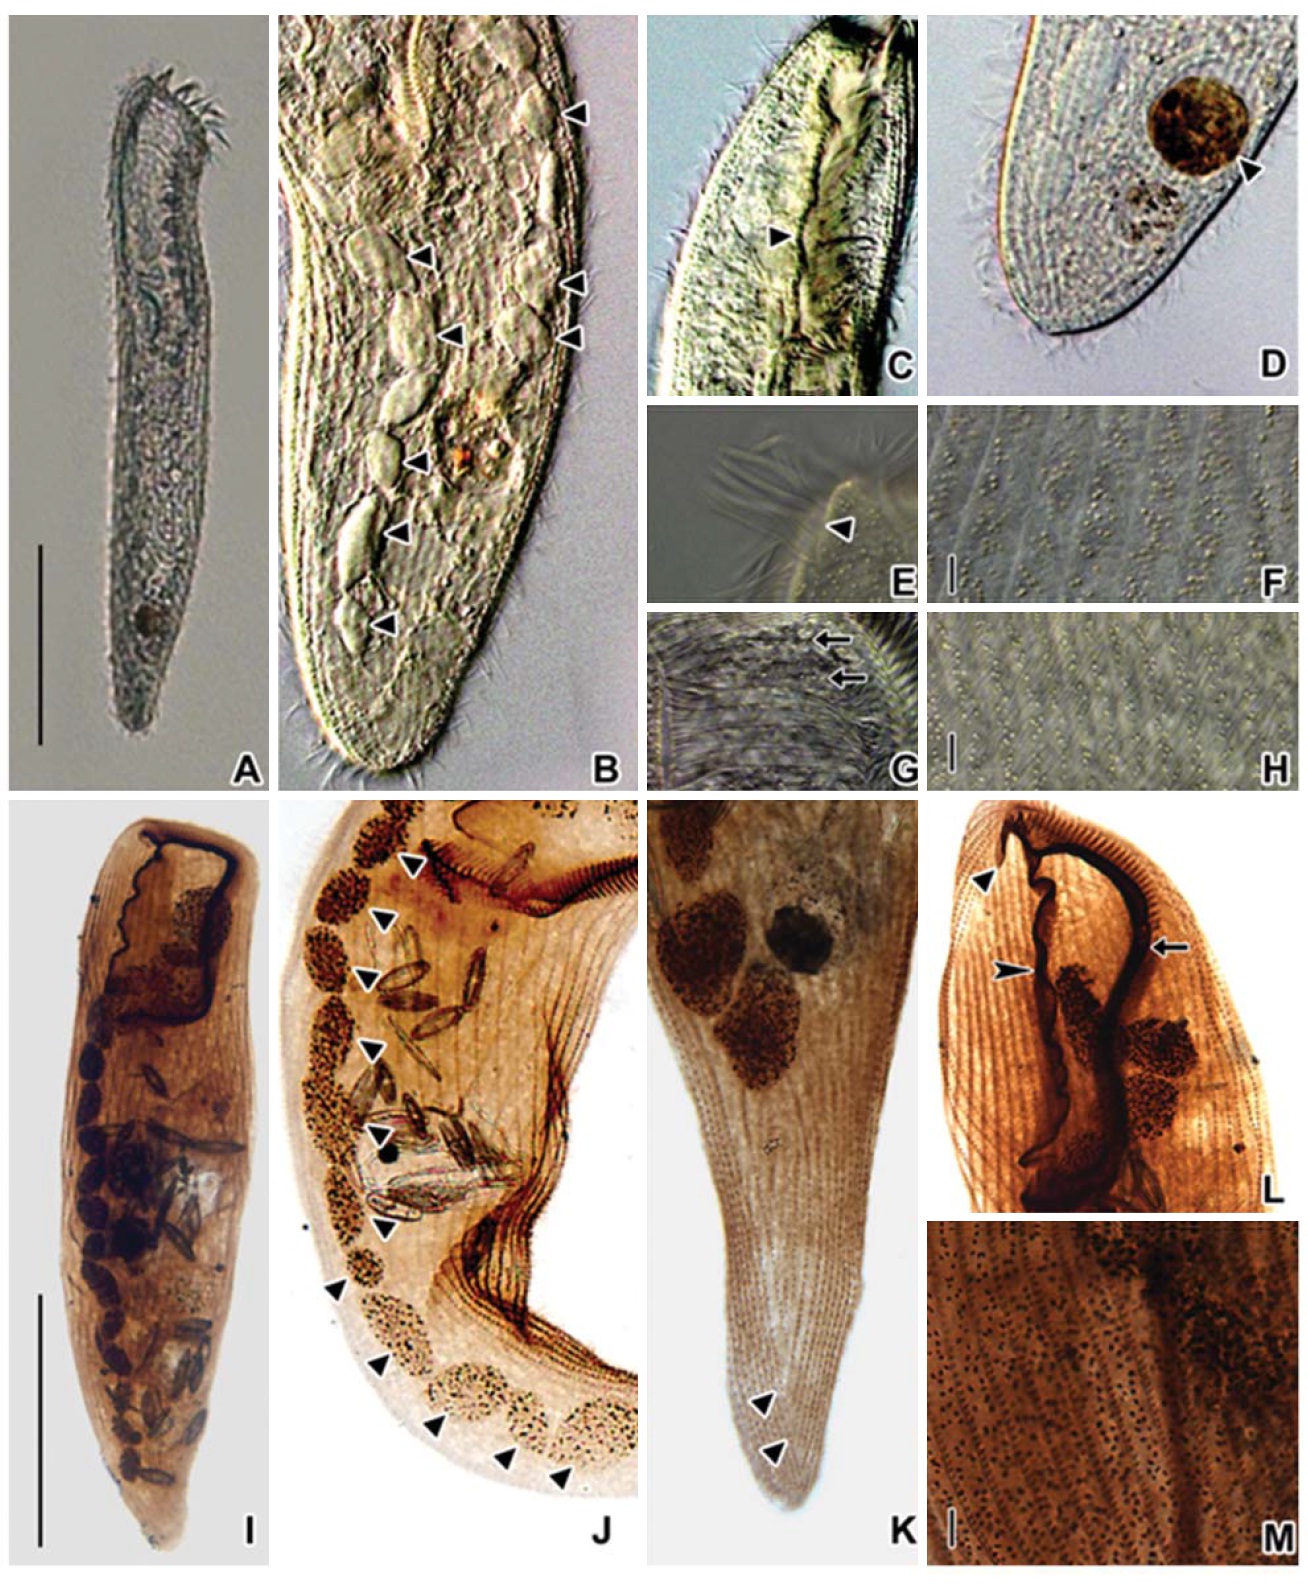 Microphotographs of Condylostoma minutum from live specimens (A-H) and after protargol impregnation (I-M). A, Ventral view of a typical individual; B, Moniliform macronuclear nodules (trianglular arrowheads); C, Paroral membrane (trianglular arrowhead); D, Food vacuole (trianglular arrowhead); E, Frontal cirrus (trianglular arrowhead); F, H, Cortical granules; G, Striated inner wall on buccal cavity (arrows); I, Ventral side view; J, Moniliform macronucleus (trianglular arrowheads); K, Suture of posterior end (trianglular arrowheads); L, To show adoral zone of membranelles (arrow), frontal cirrus (trianglular arrowhead), paroral membrane (arrowhead); M, Impregnated cortical granules between somatic kineties. Scale bars: A, I=100 μm, F, H, M=5 μm.